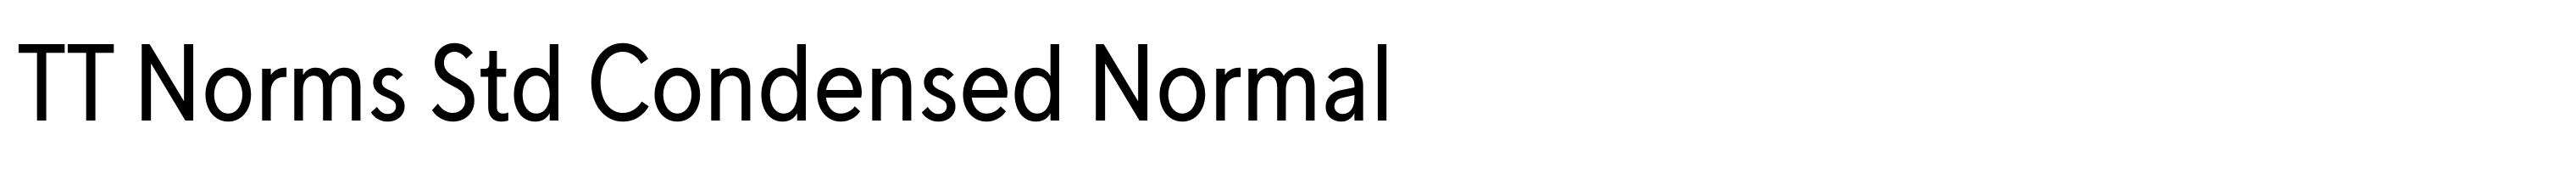 TT Norms Std Condensed Normal